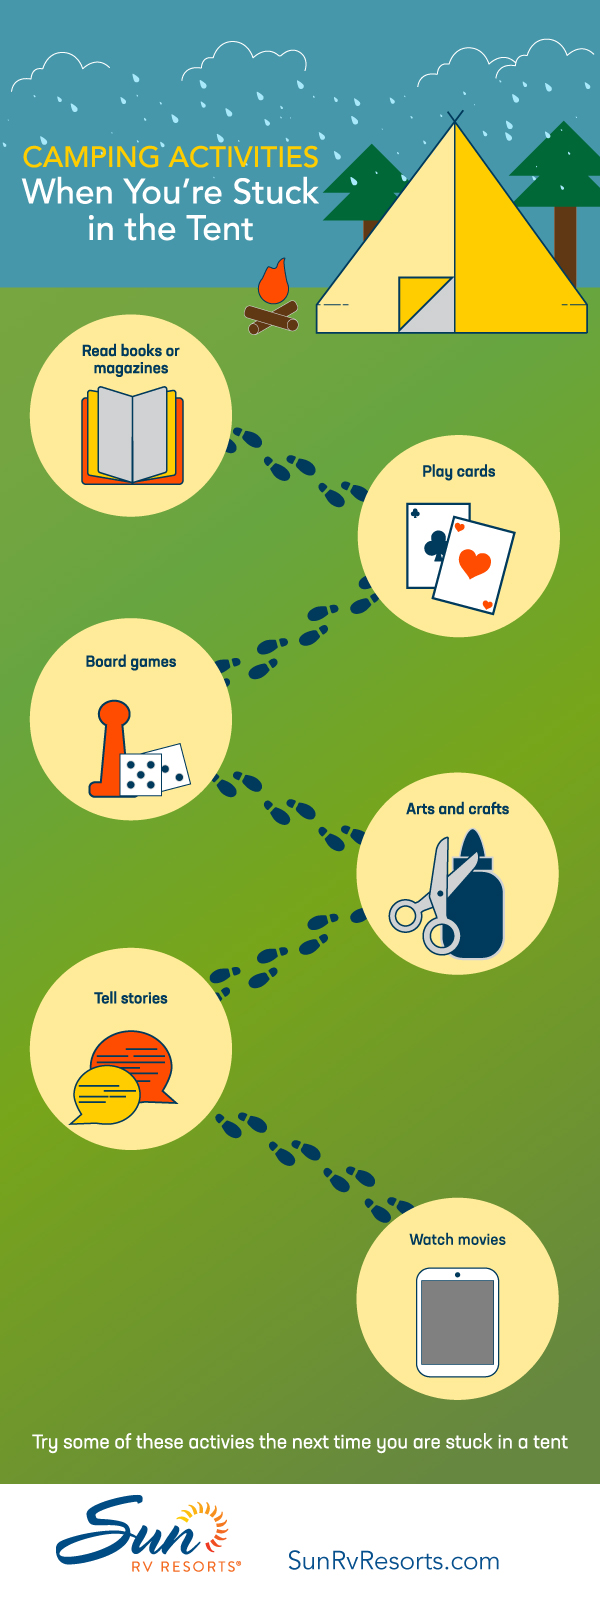 Camping Activities for the Tent [Infographic]